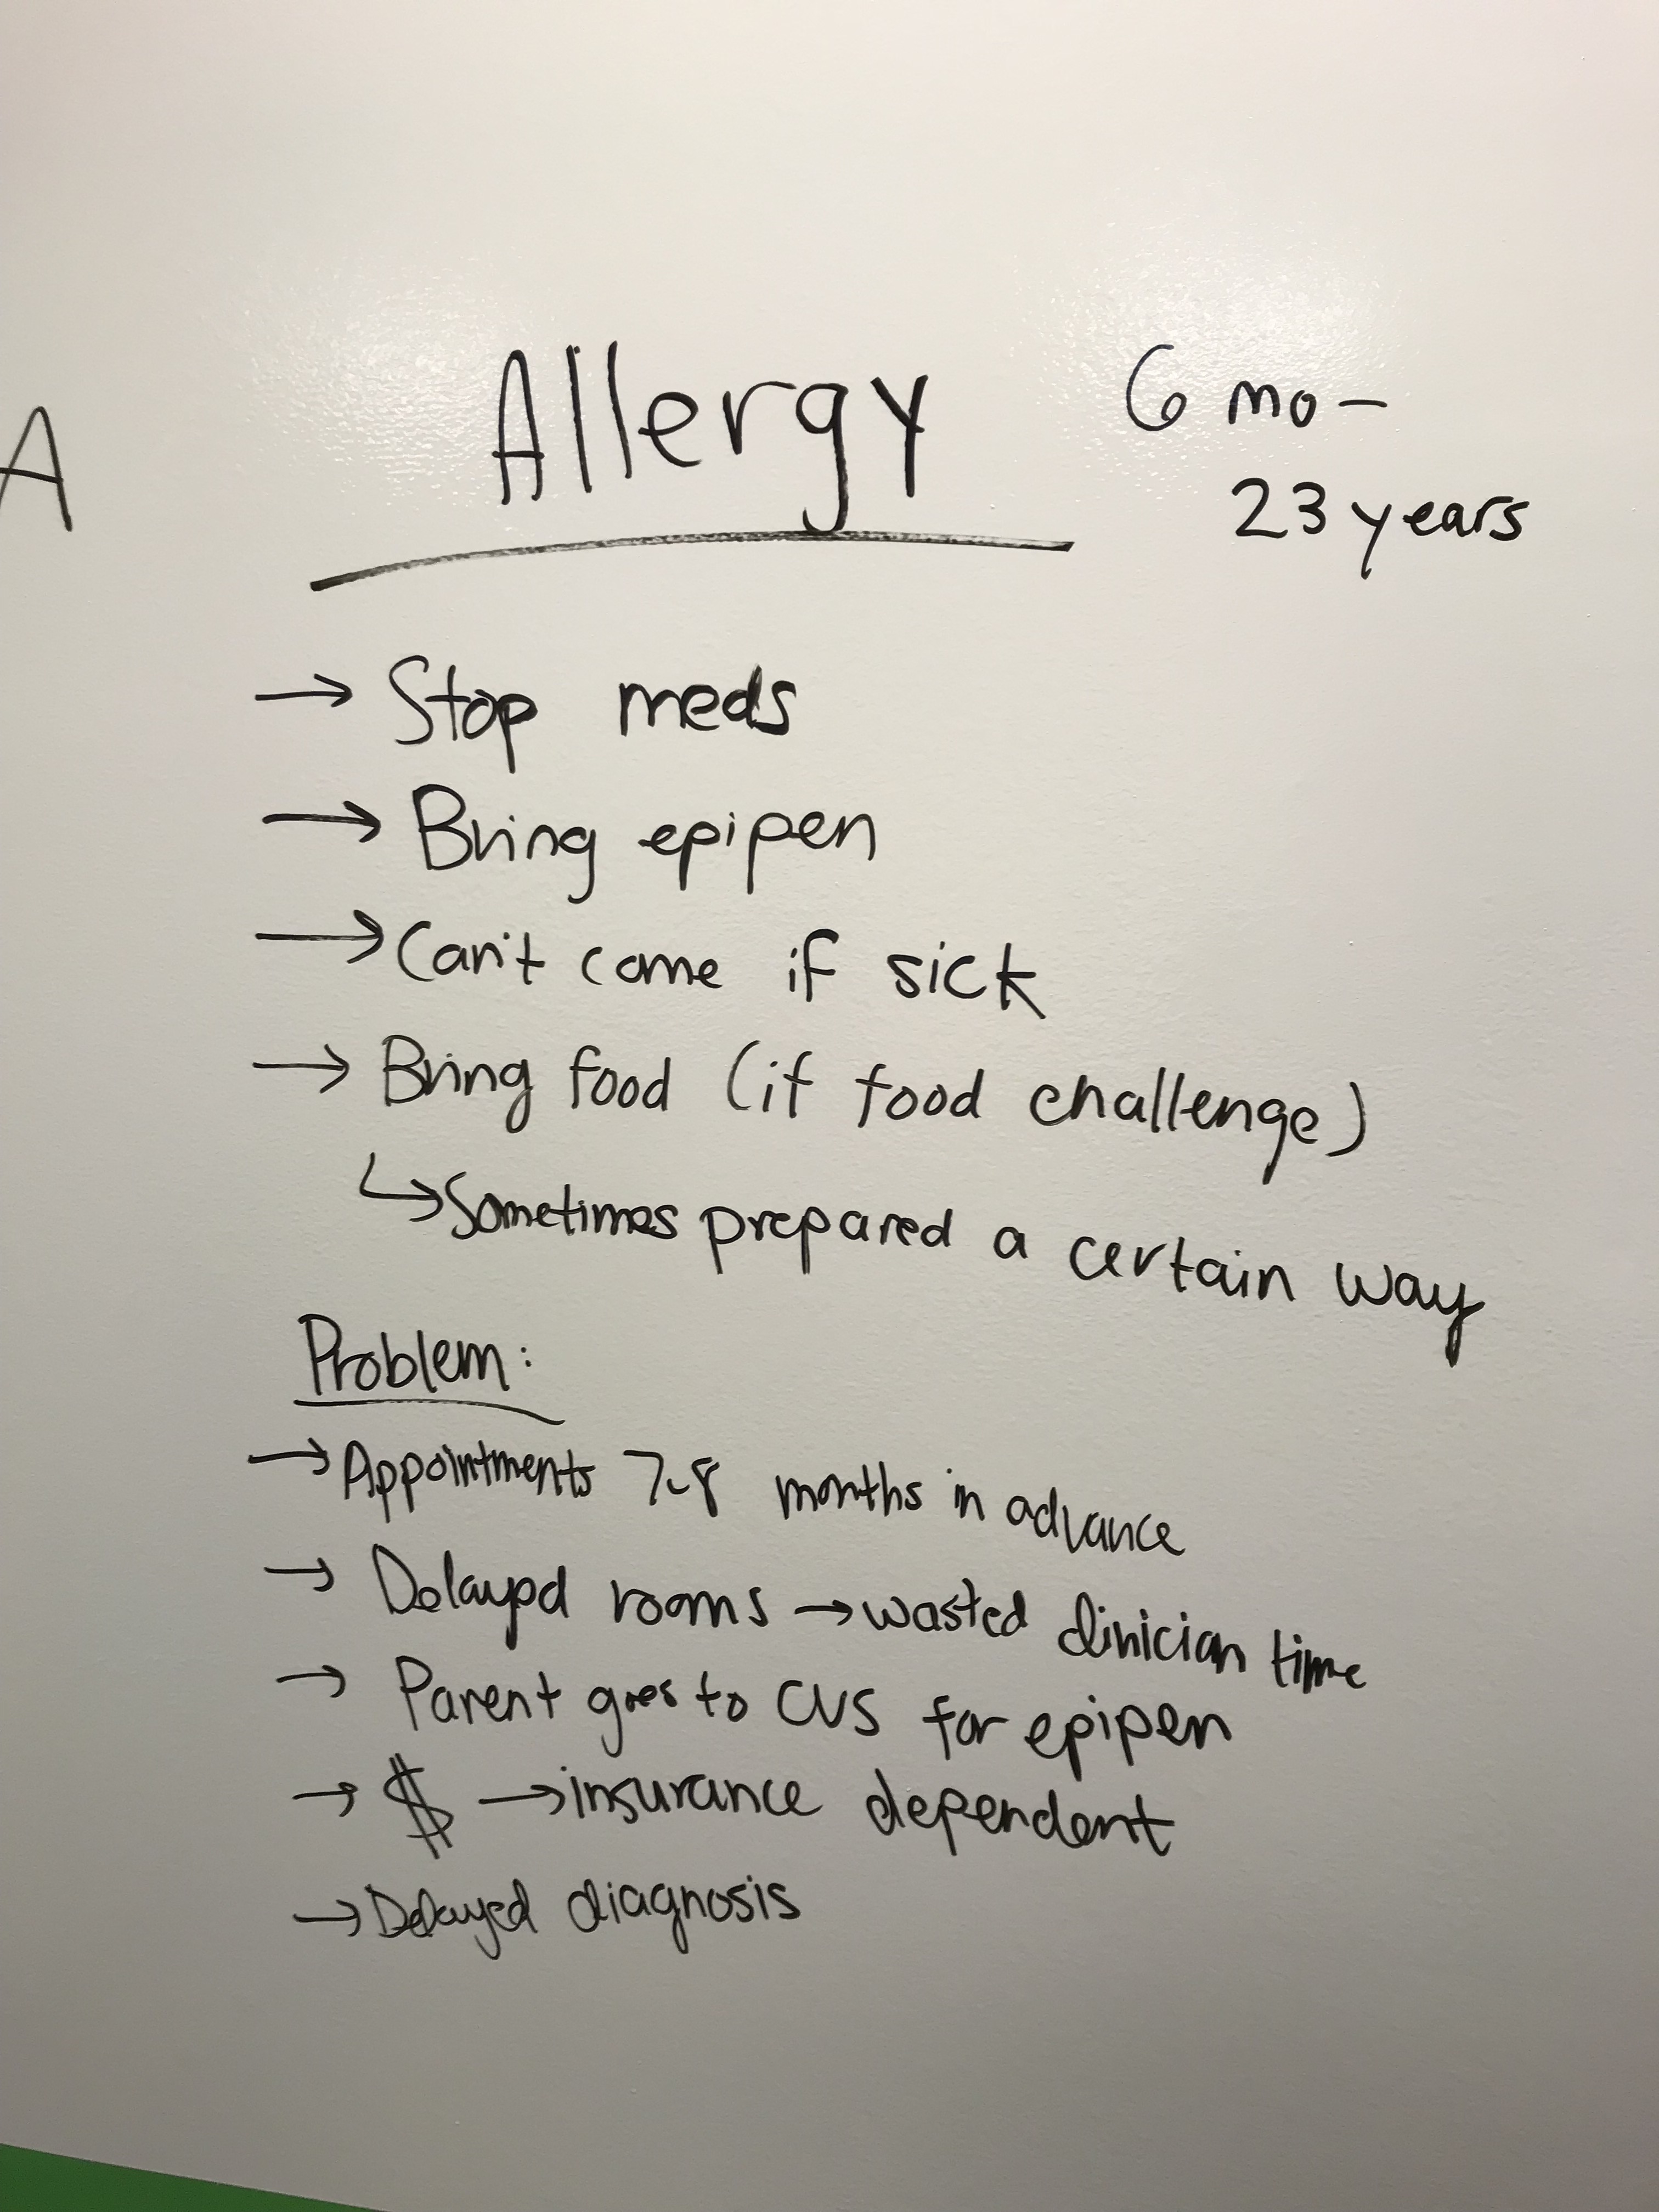 Whiteboard showing a list of problems families and children scheduled for allergy visits encounter